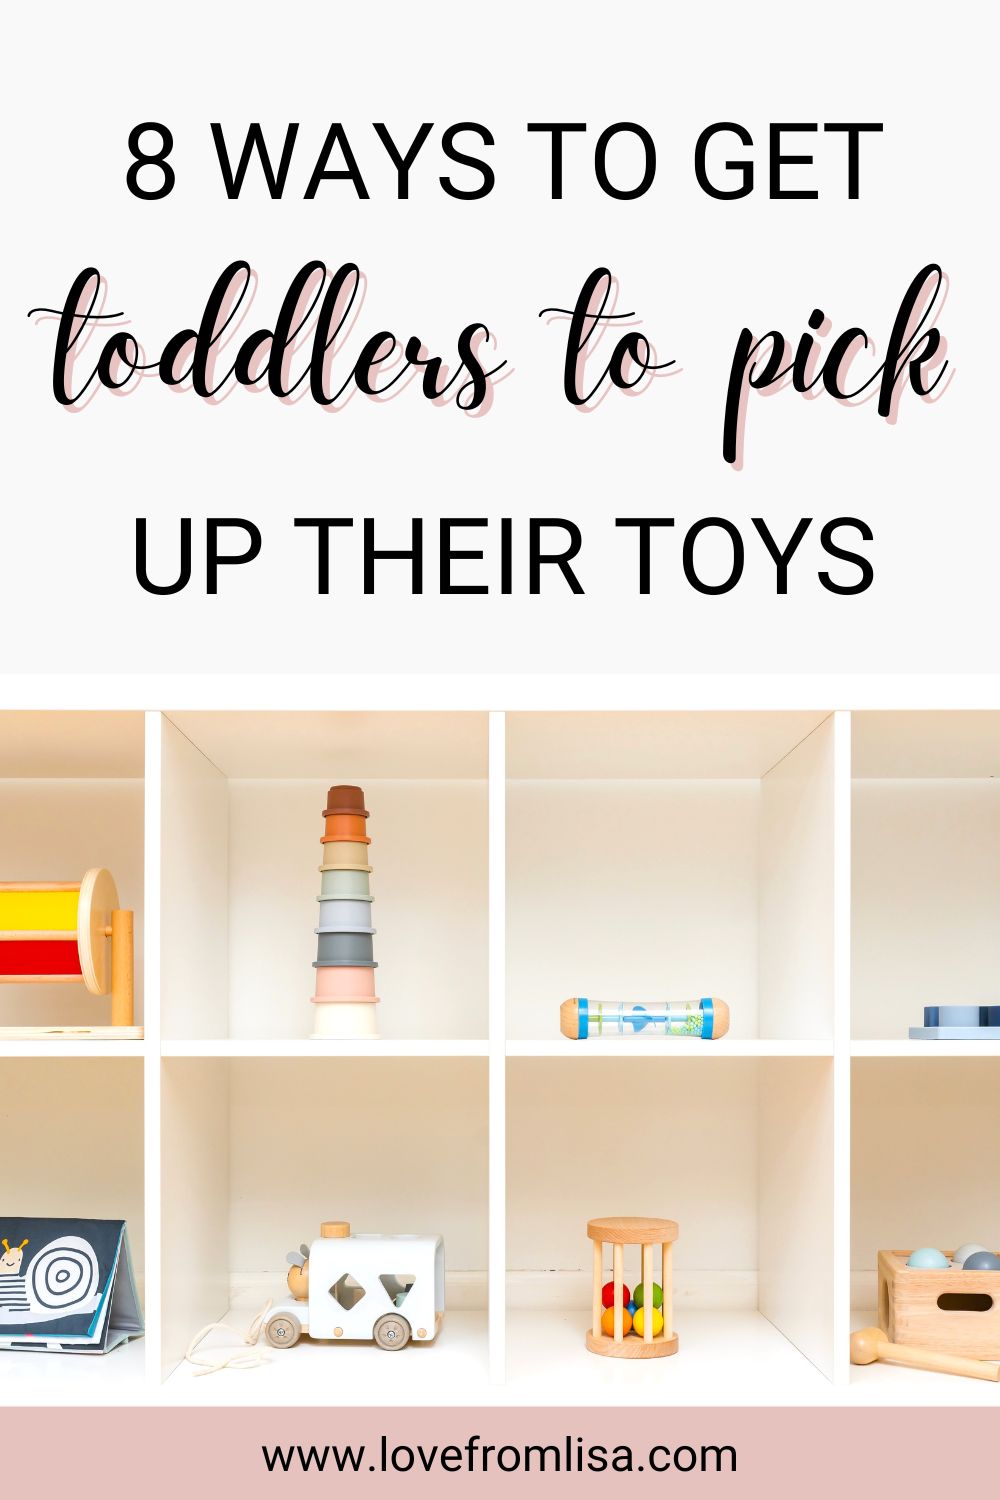 8 ways to get toddlers to pick up their toys Instagram Reel Pinterest